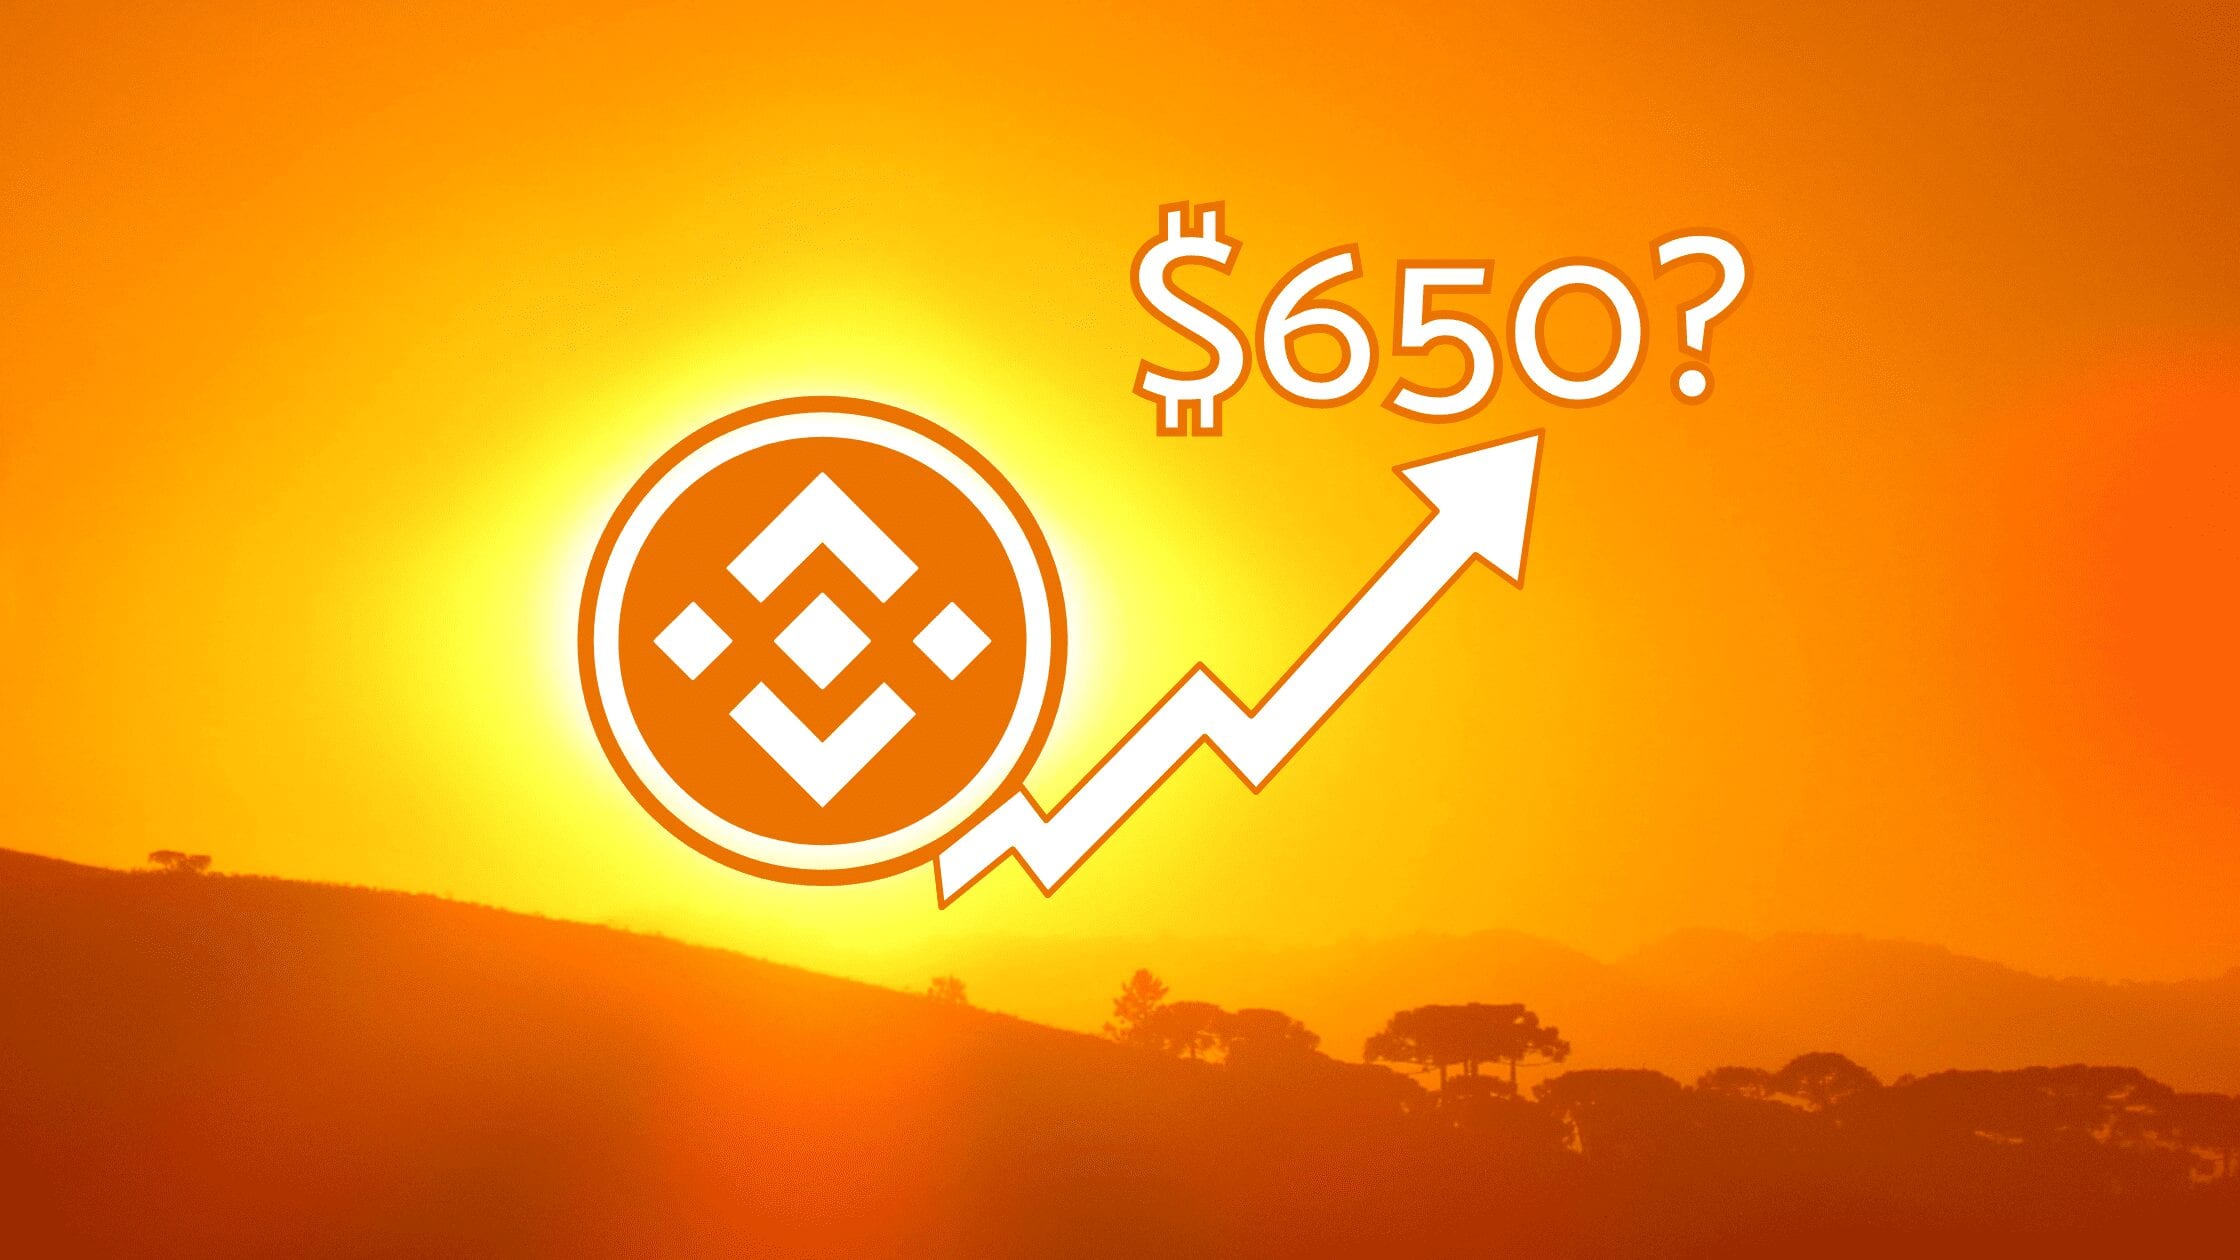 Bnb Price Prediction: Is Binance Coin Ready For $650 Usd? | Hodlin